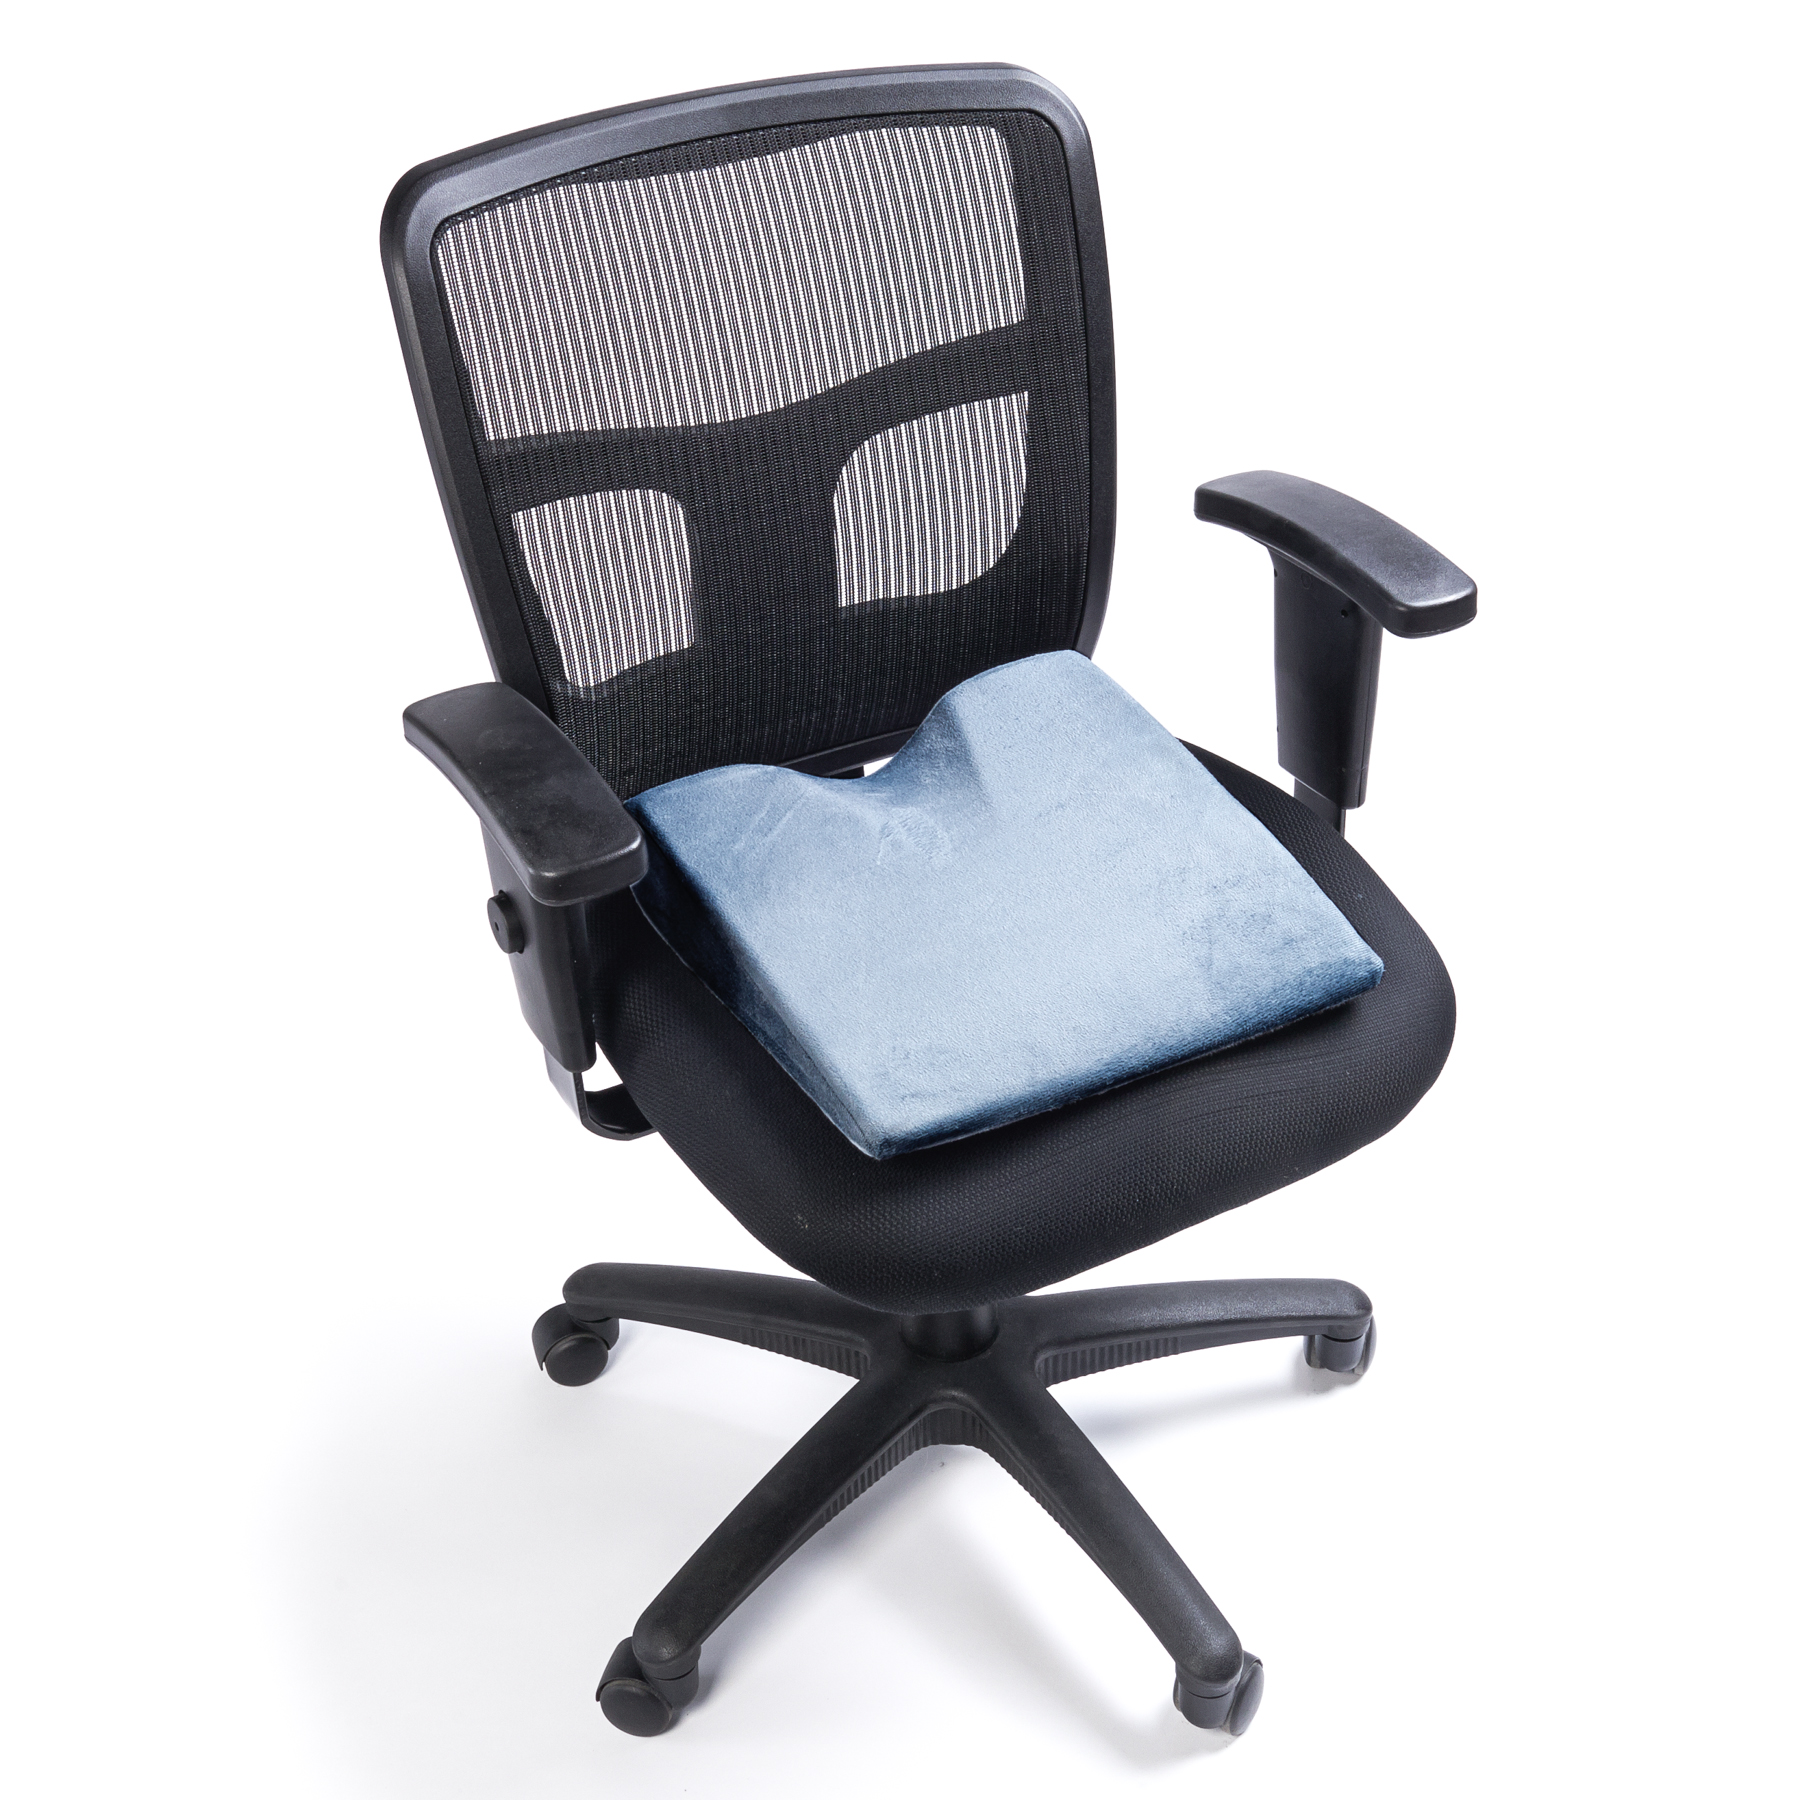 https://blackmountainproducts.com/wp-content/uploads/2017/02/GrayCushion-1.Chair_1800px.jpg